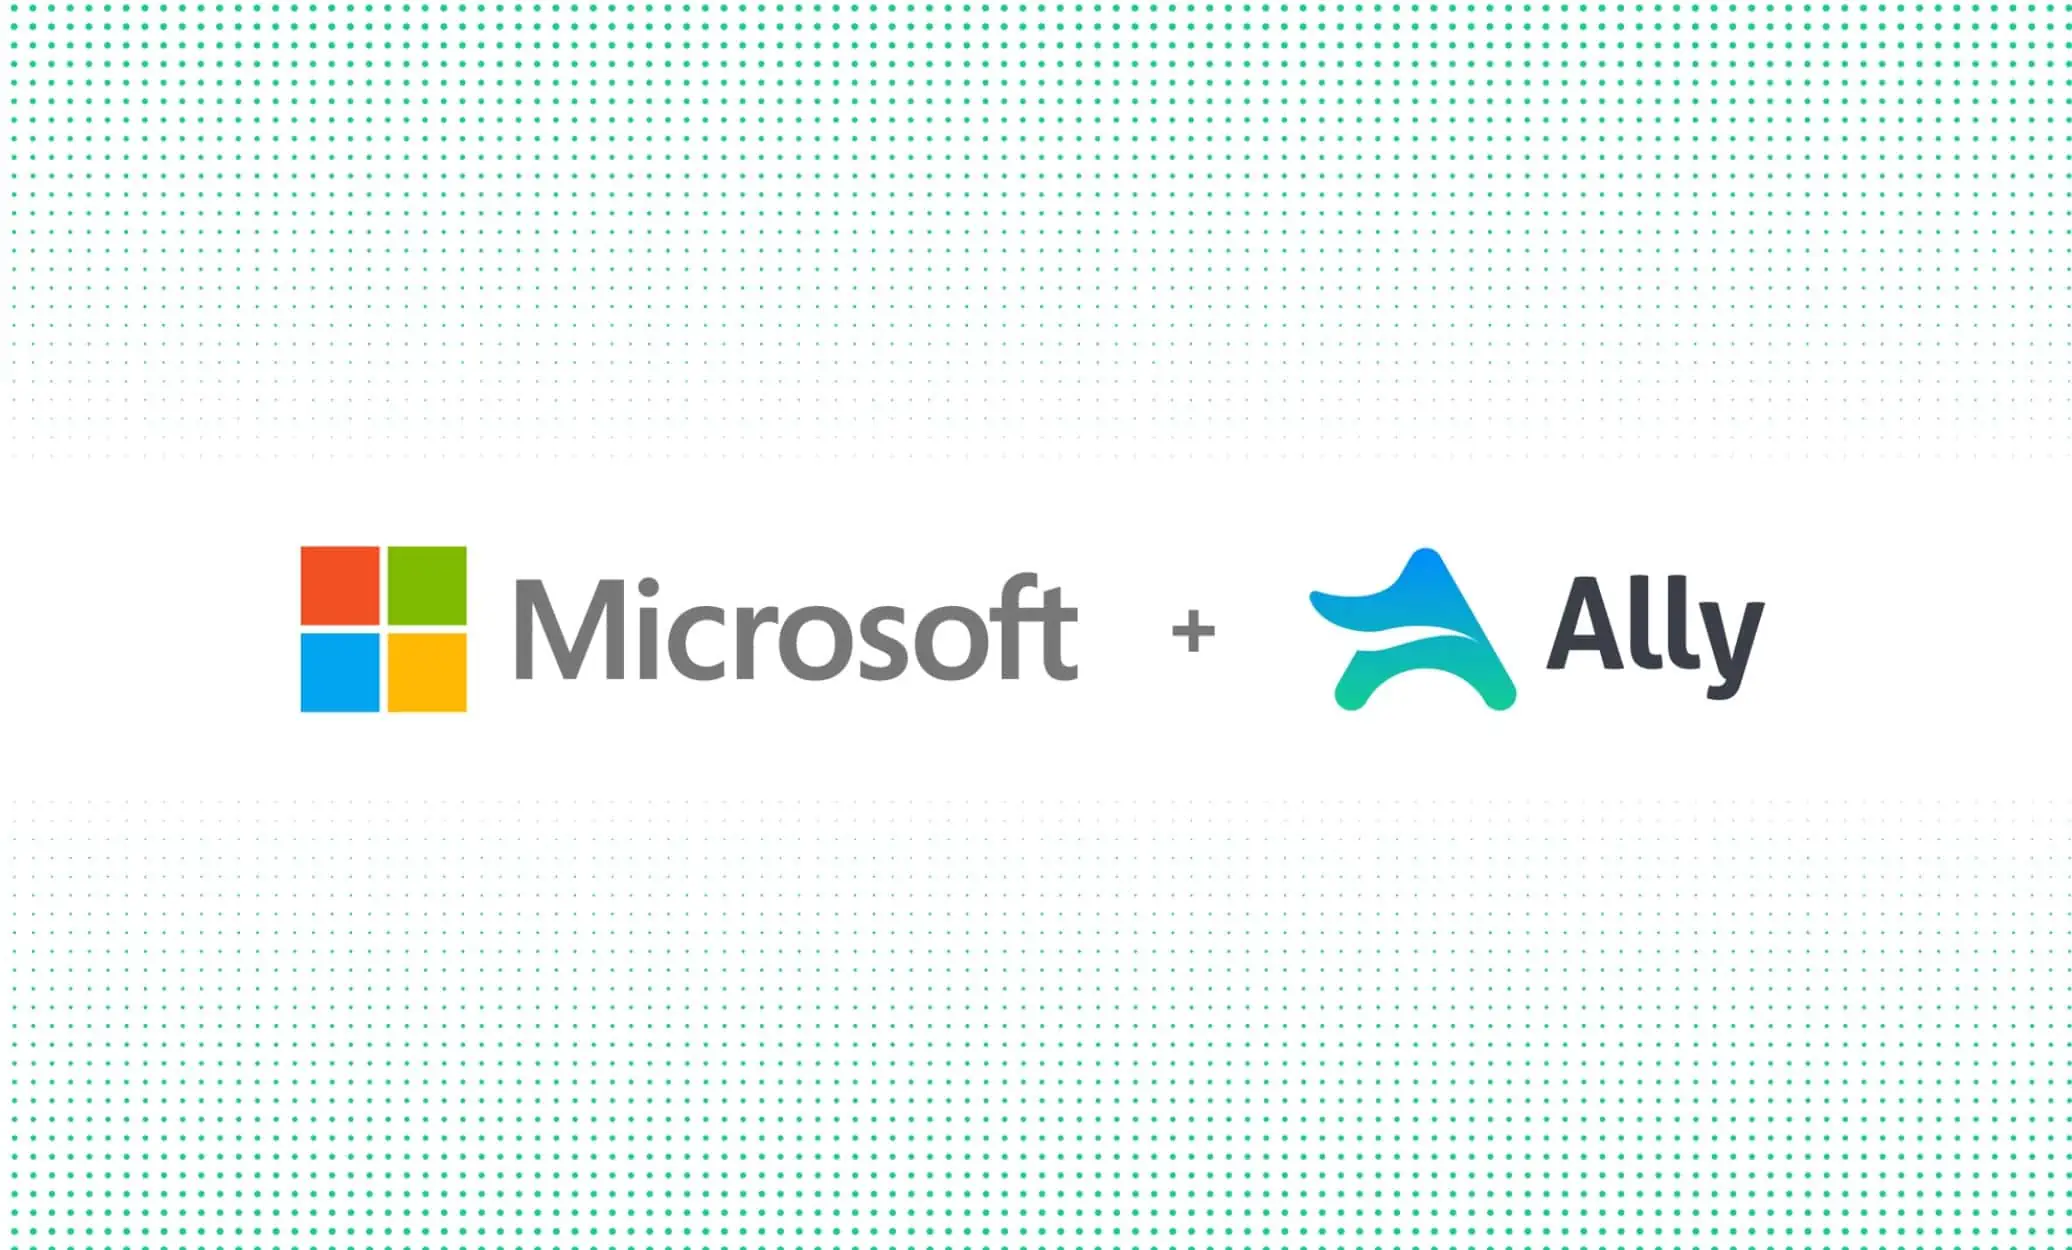 Microsoft acquires Ally.io, a leading OKR (objectives and key results) company